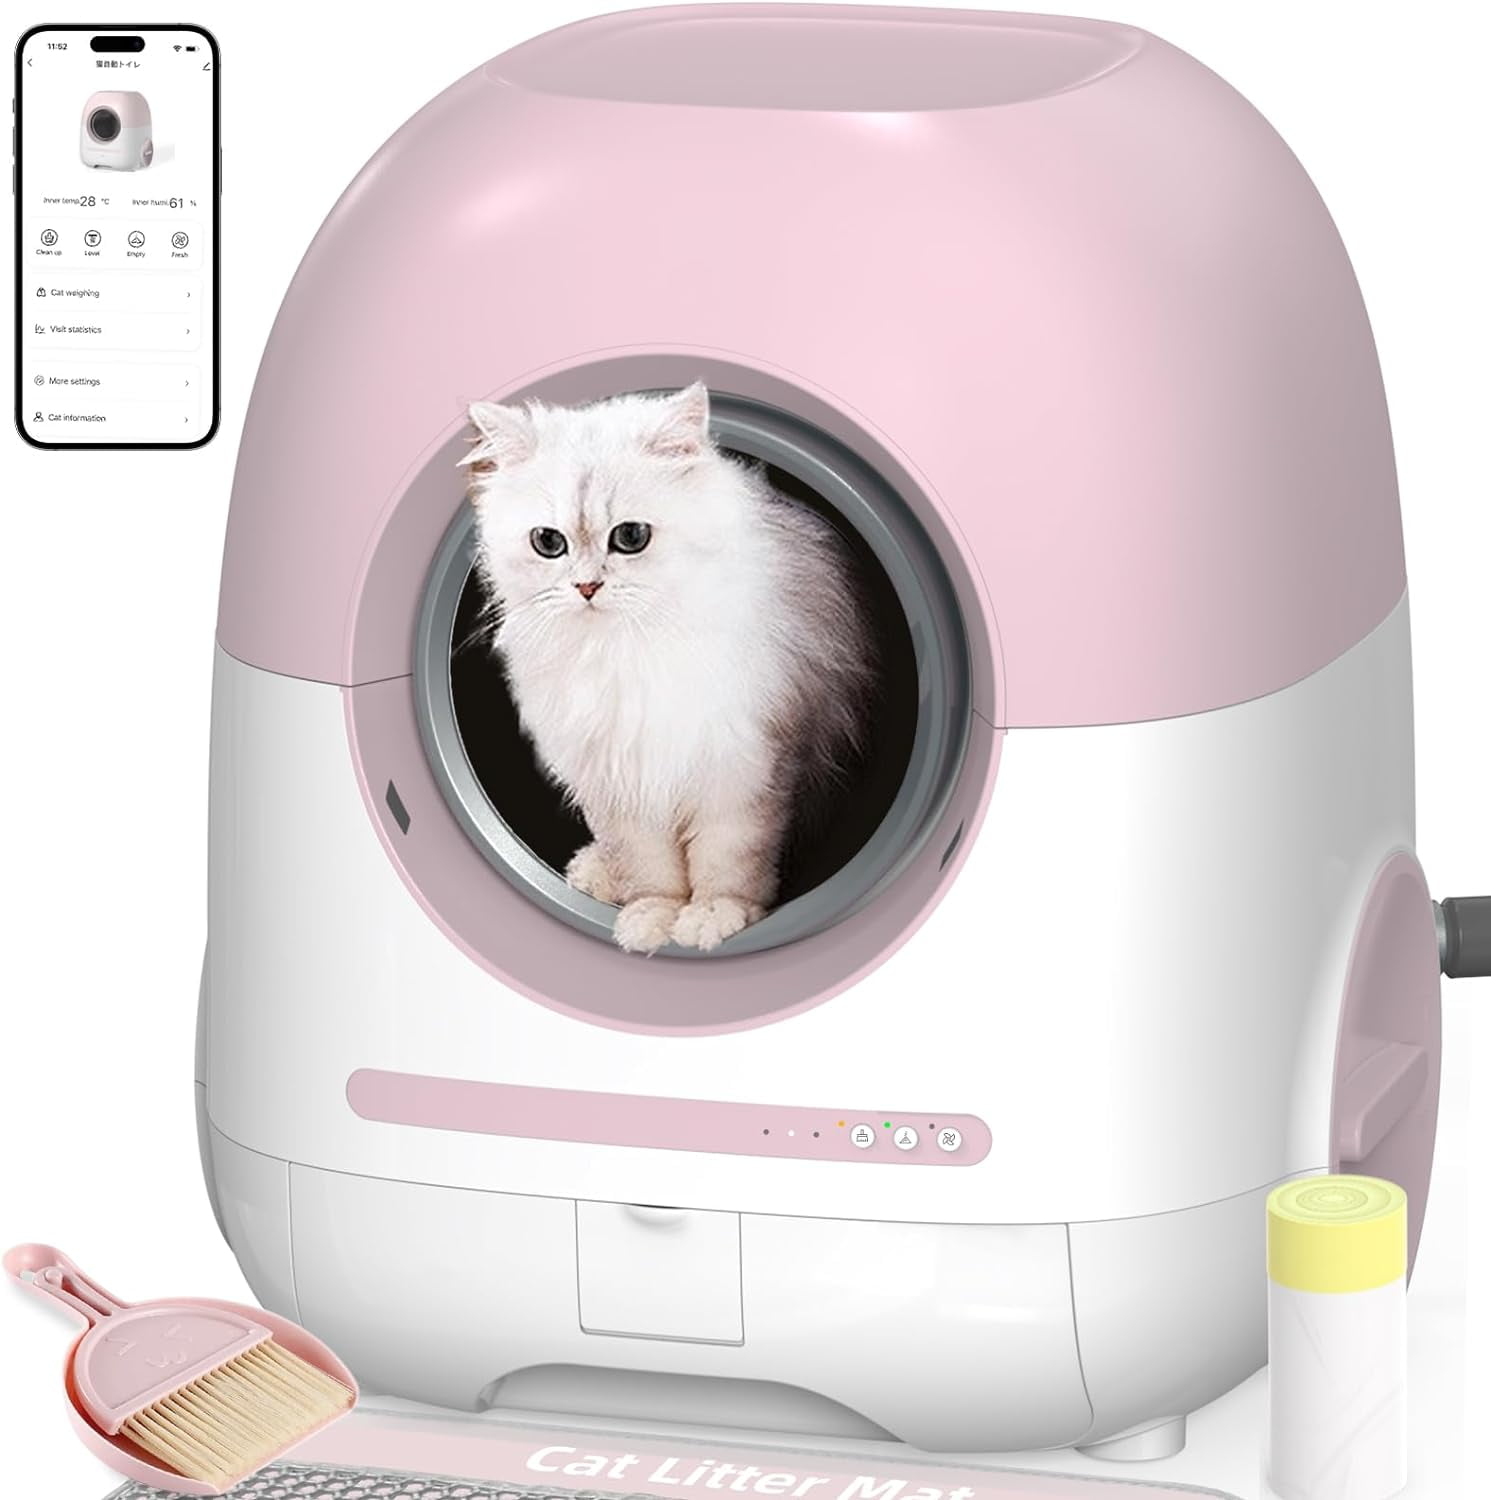 REDSASA Automatic Cat Litter Box Self Cleaning for Multiple Cats,2.4G & 5G Wifi App Control with Cat Mat & Cleaning Kit Liner & Odor-Removal, Pink